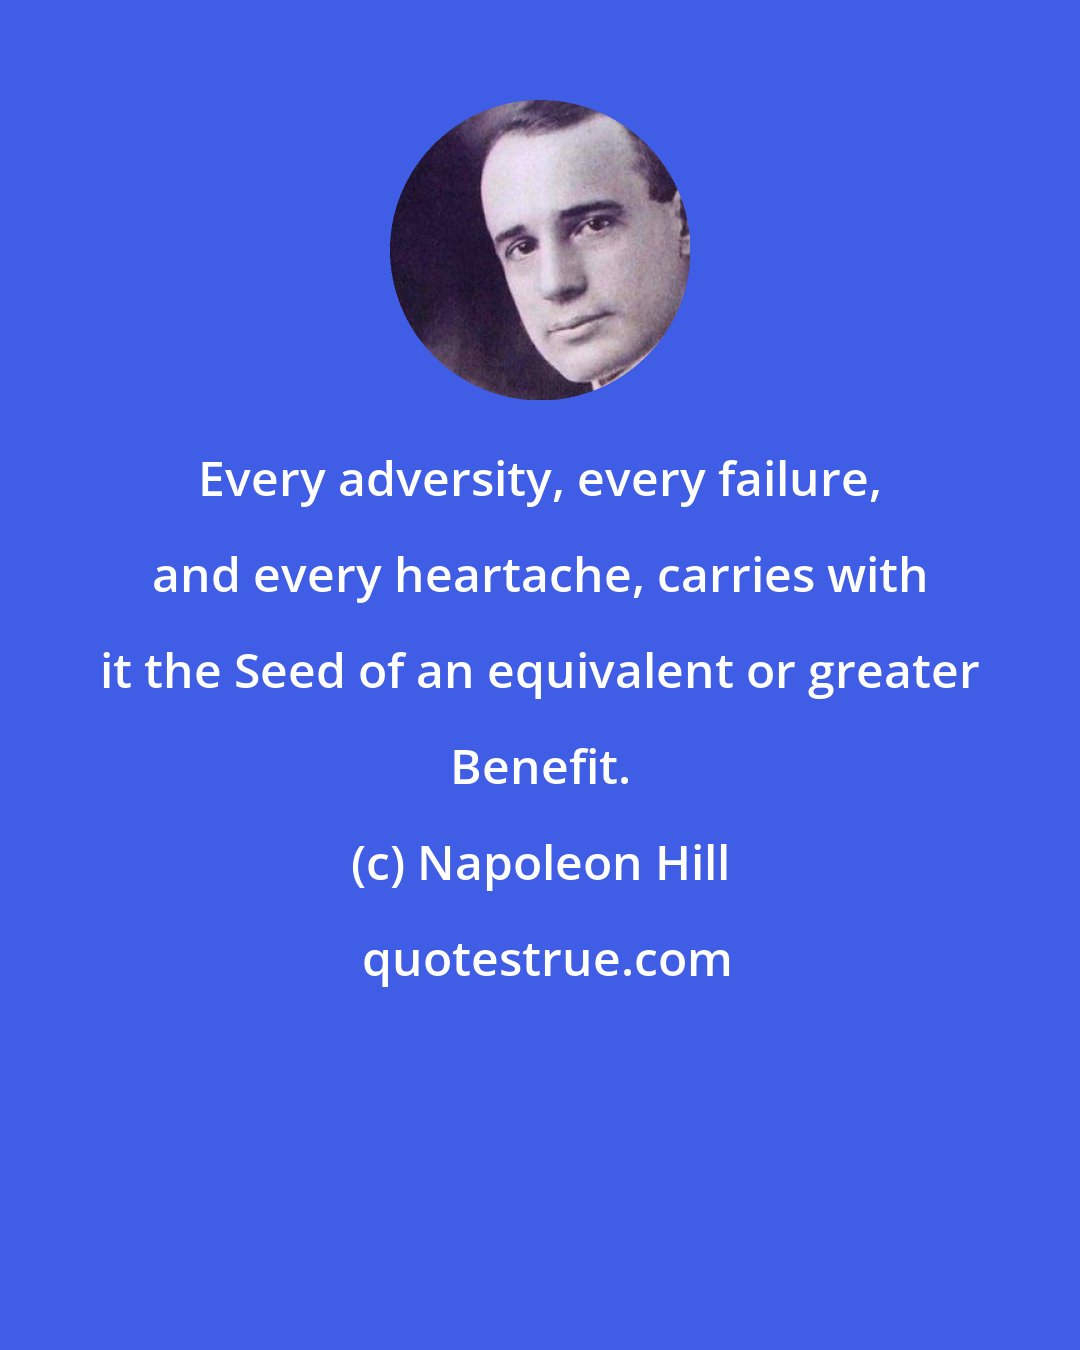 Napoleon Hill: Every adversity, every failure, and every heartache, carries with it the Seed of an equivalent or greater Benefit.